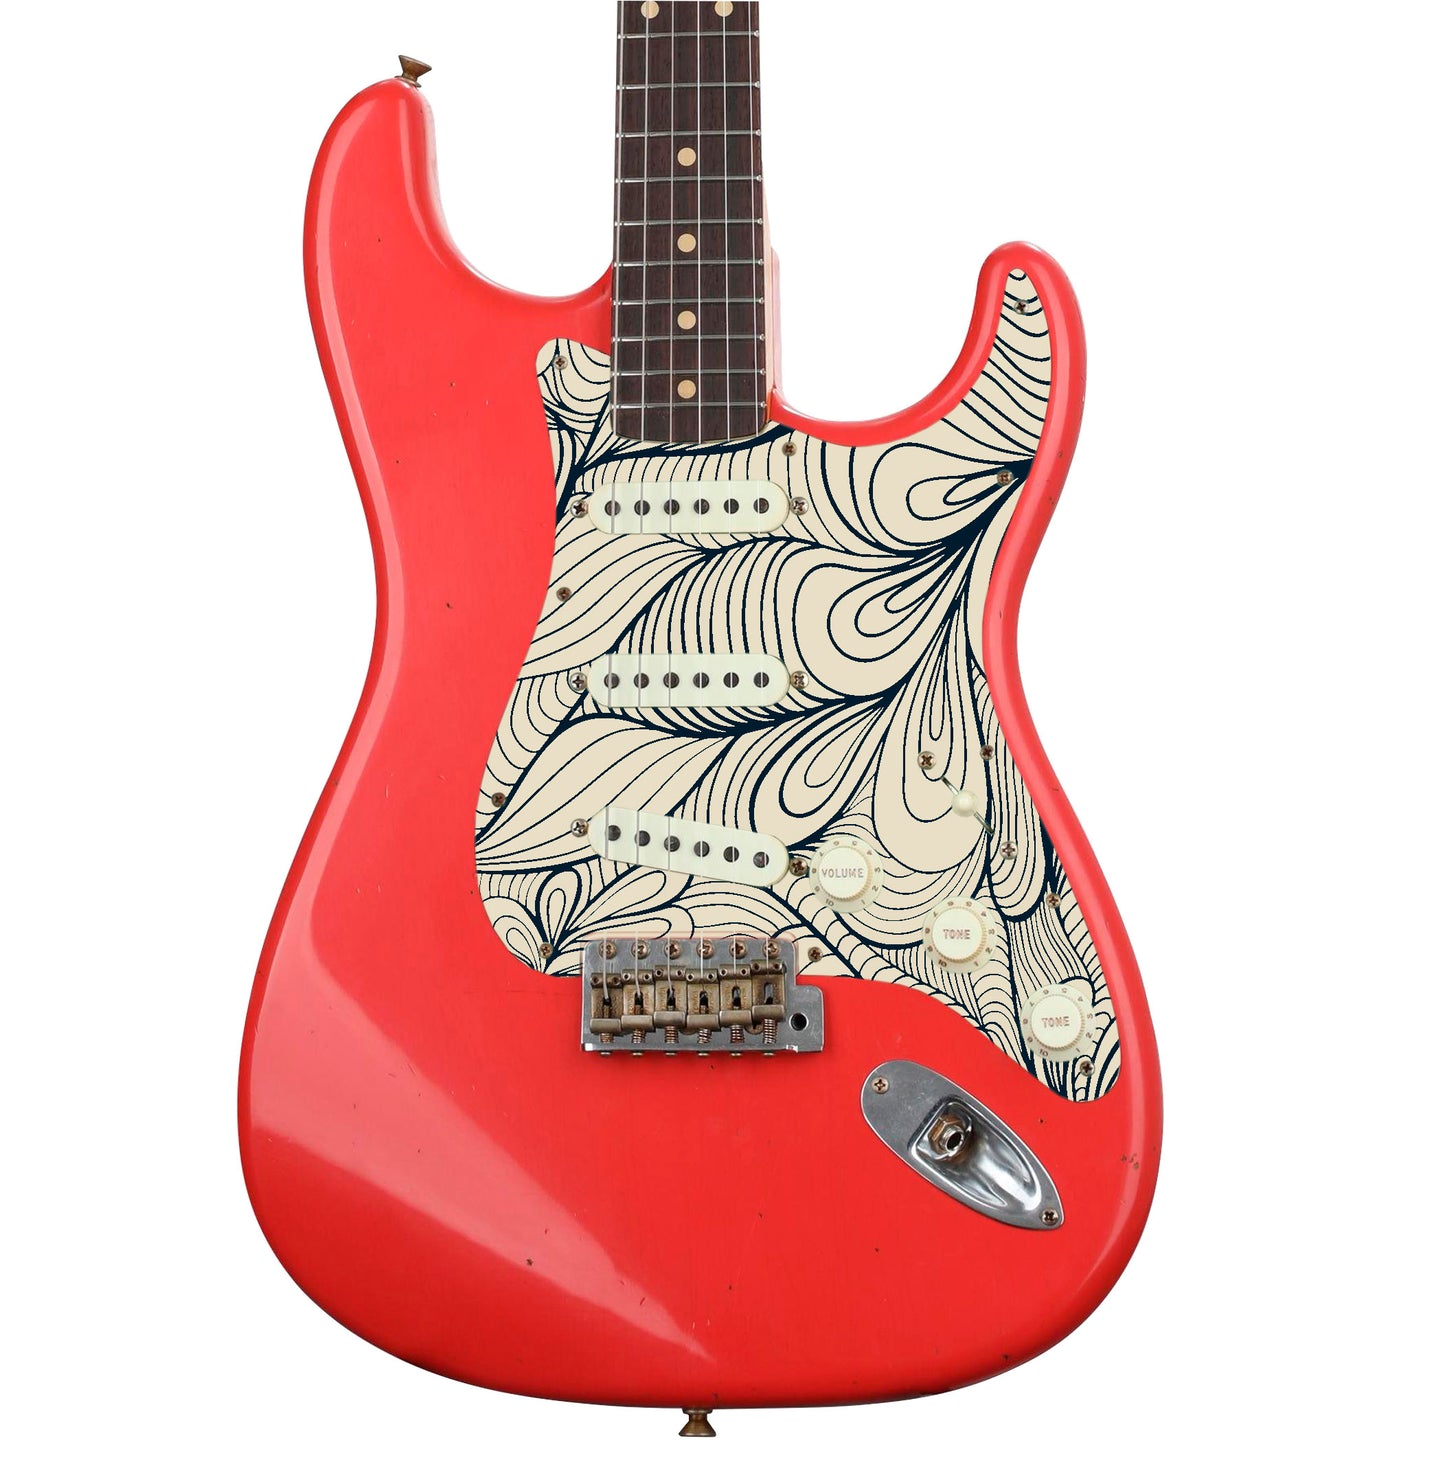 Guitar Custom PickGuard Sticker Skins. Customise your own existing Pickguard, Headstock, Tremolo Cover plate. The Swirls PK09